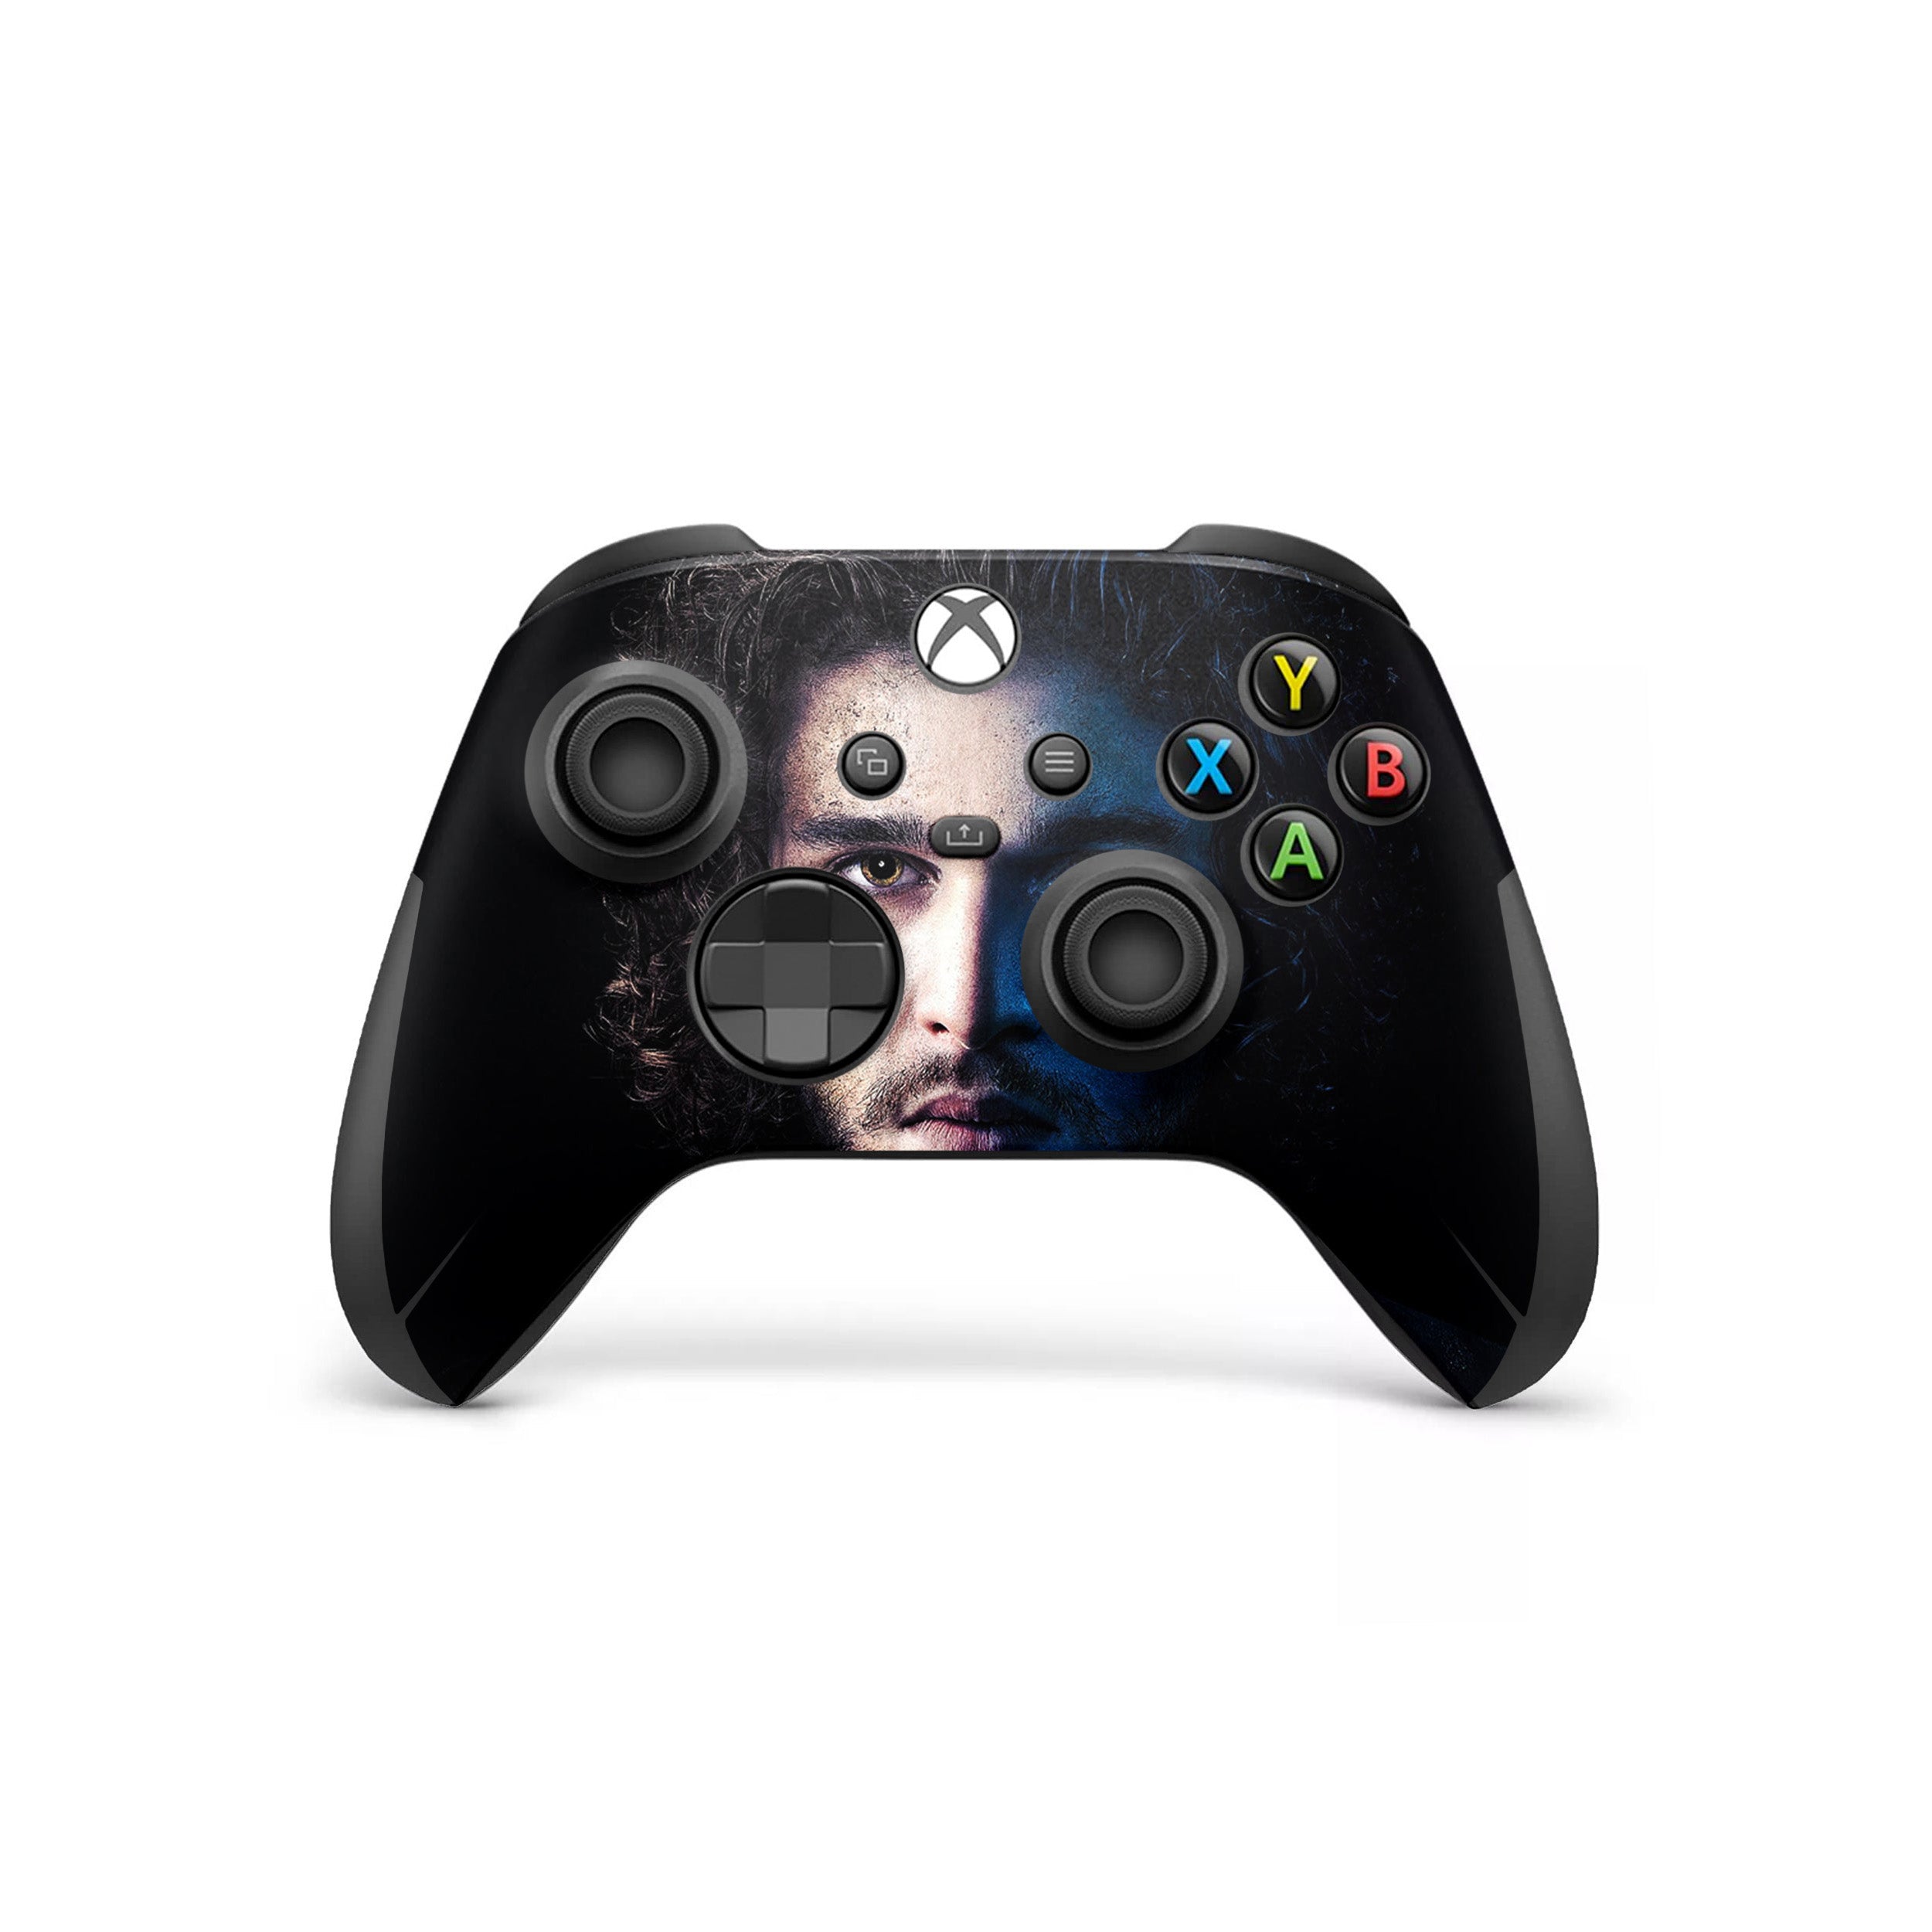 A video game skin featuring a Game Of Thrones Jon Snow design for the Xbox Wireless Controller.